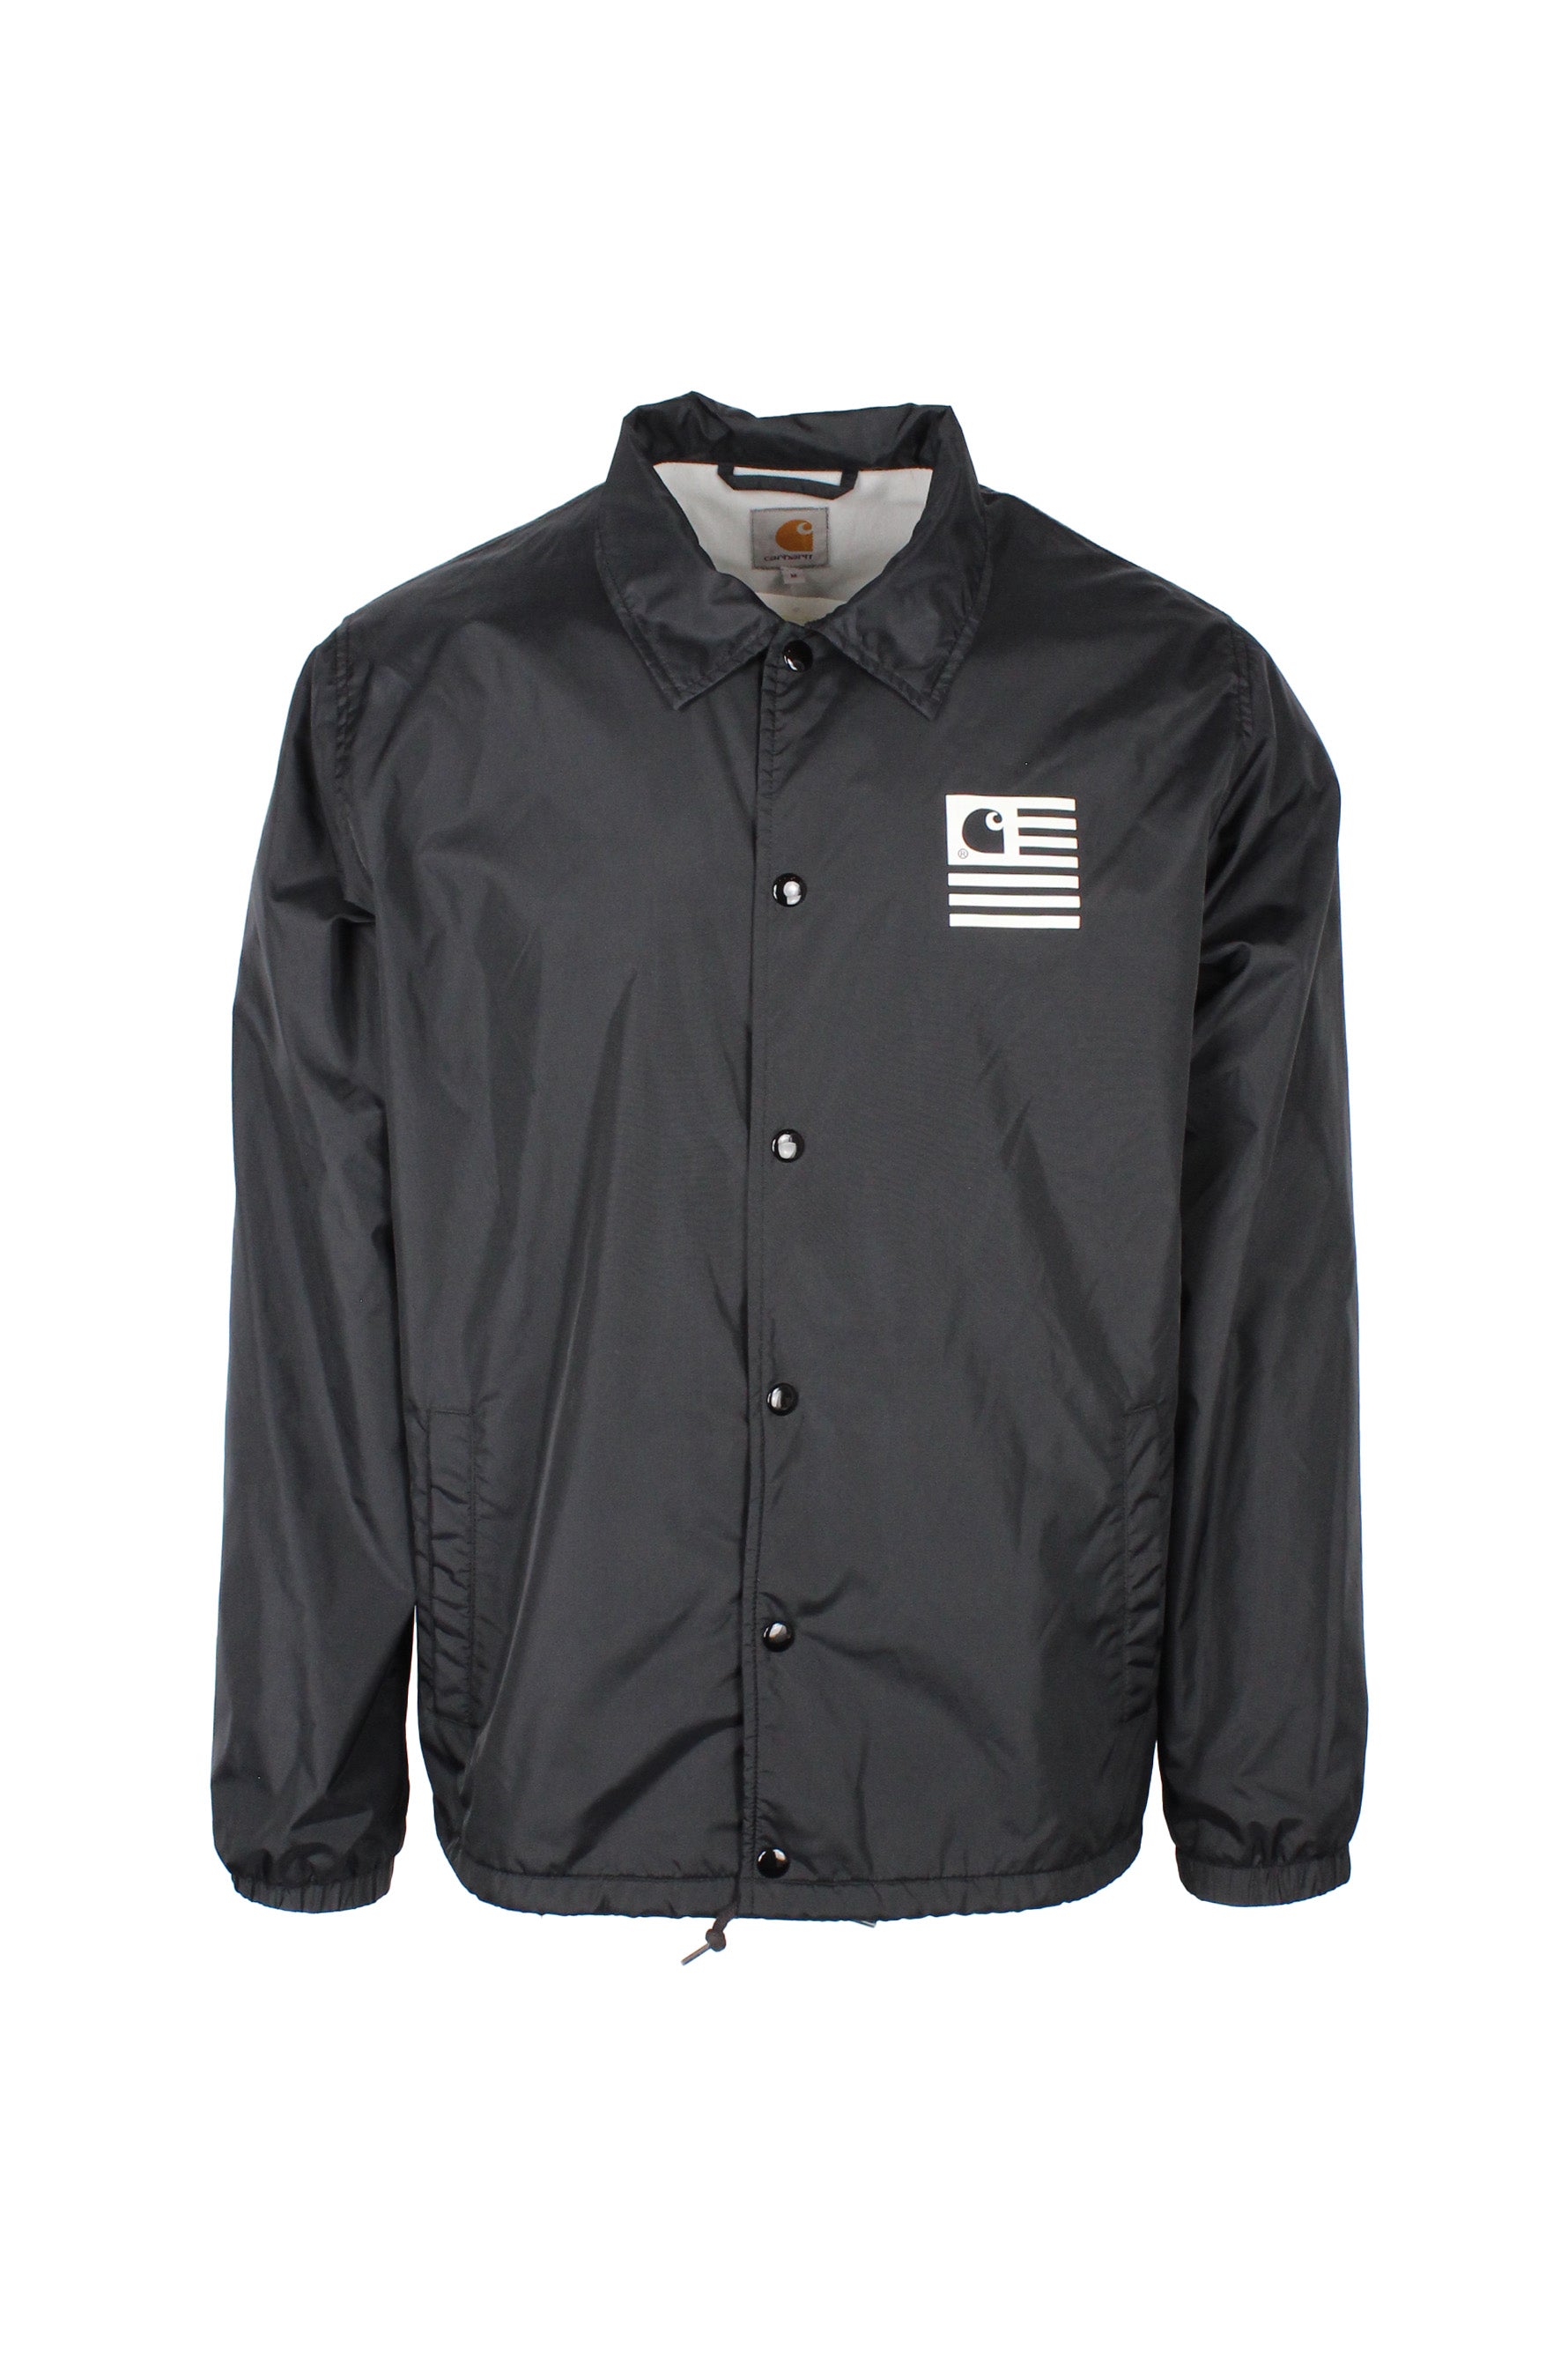 front view of carhartt wip black snap button up ‘state’ coach jacket. features carhartt ‘c’ state logo printed at left breast, side hand pockets, fully lined, elastic at cuffs, and drawstring at waist.